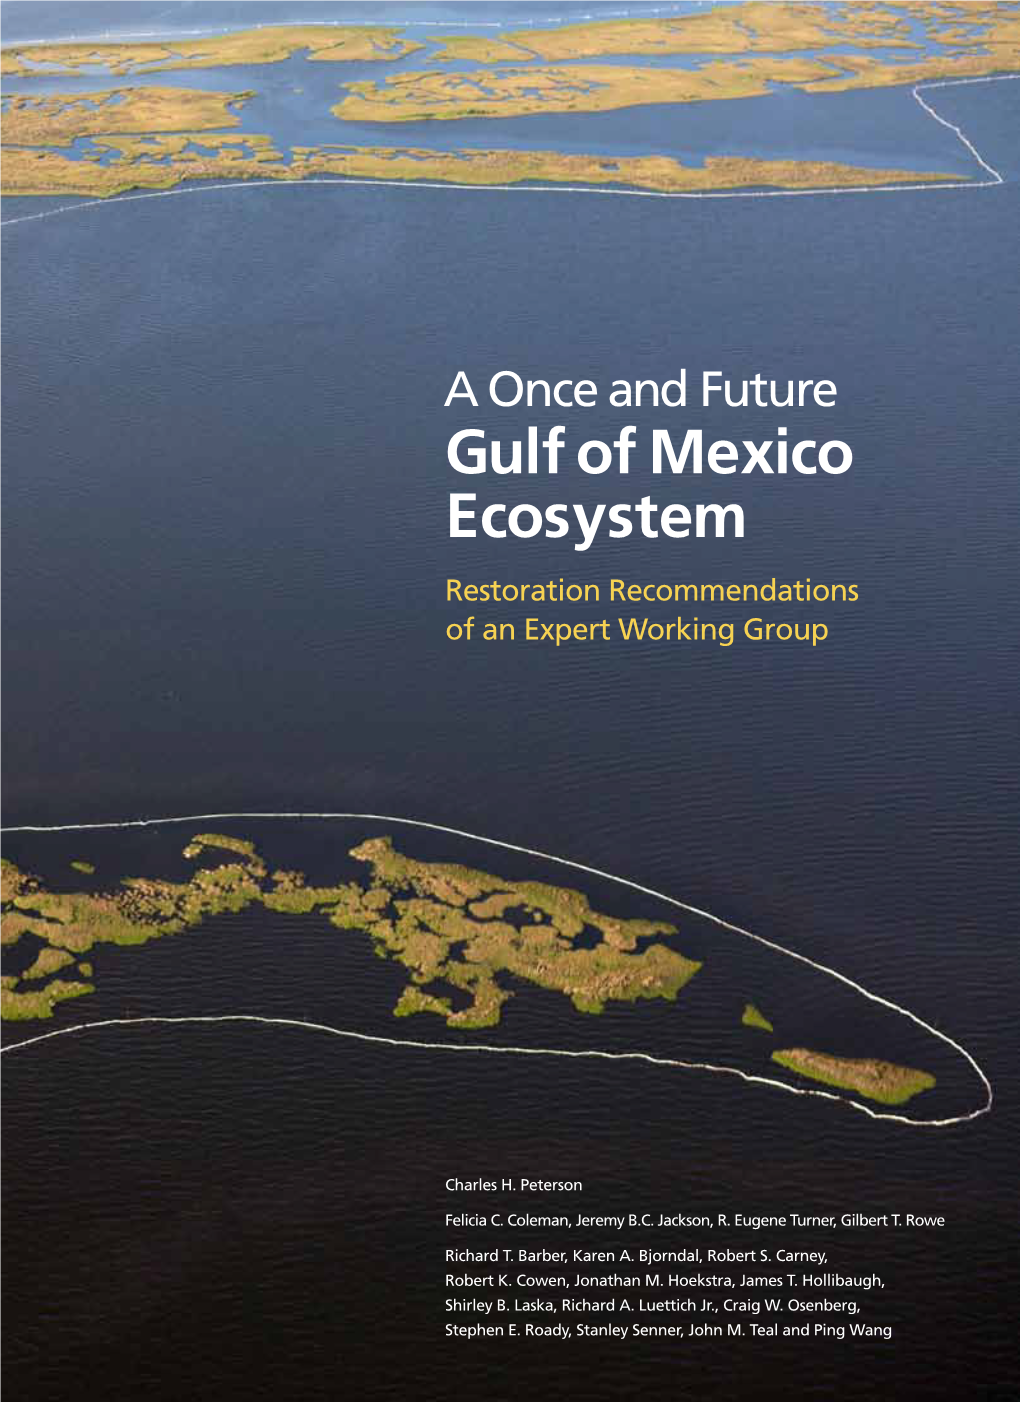 A Once and Future Gulf of Mexico Ecosystem Restoration Recommendations of an Expert Working Group